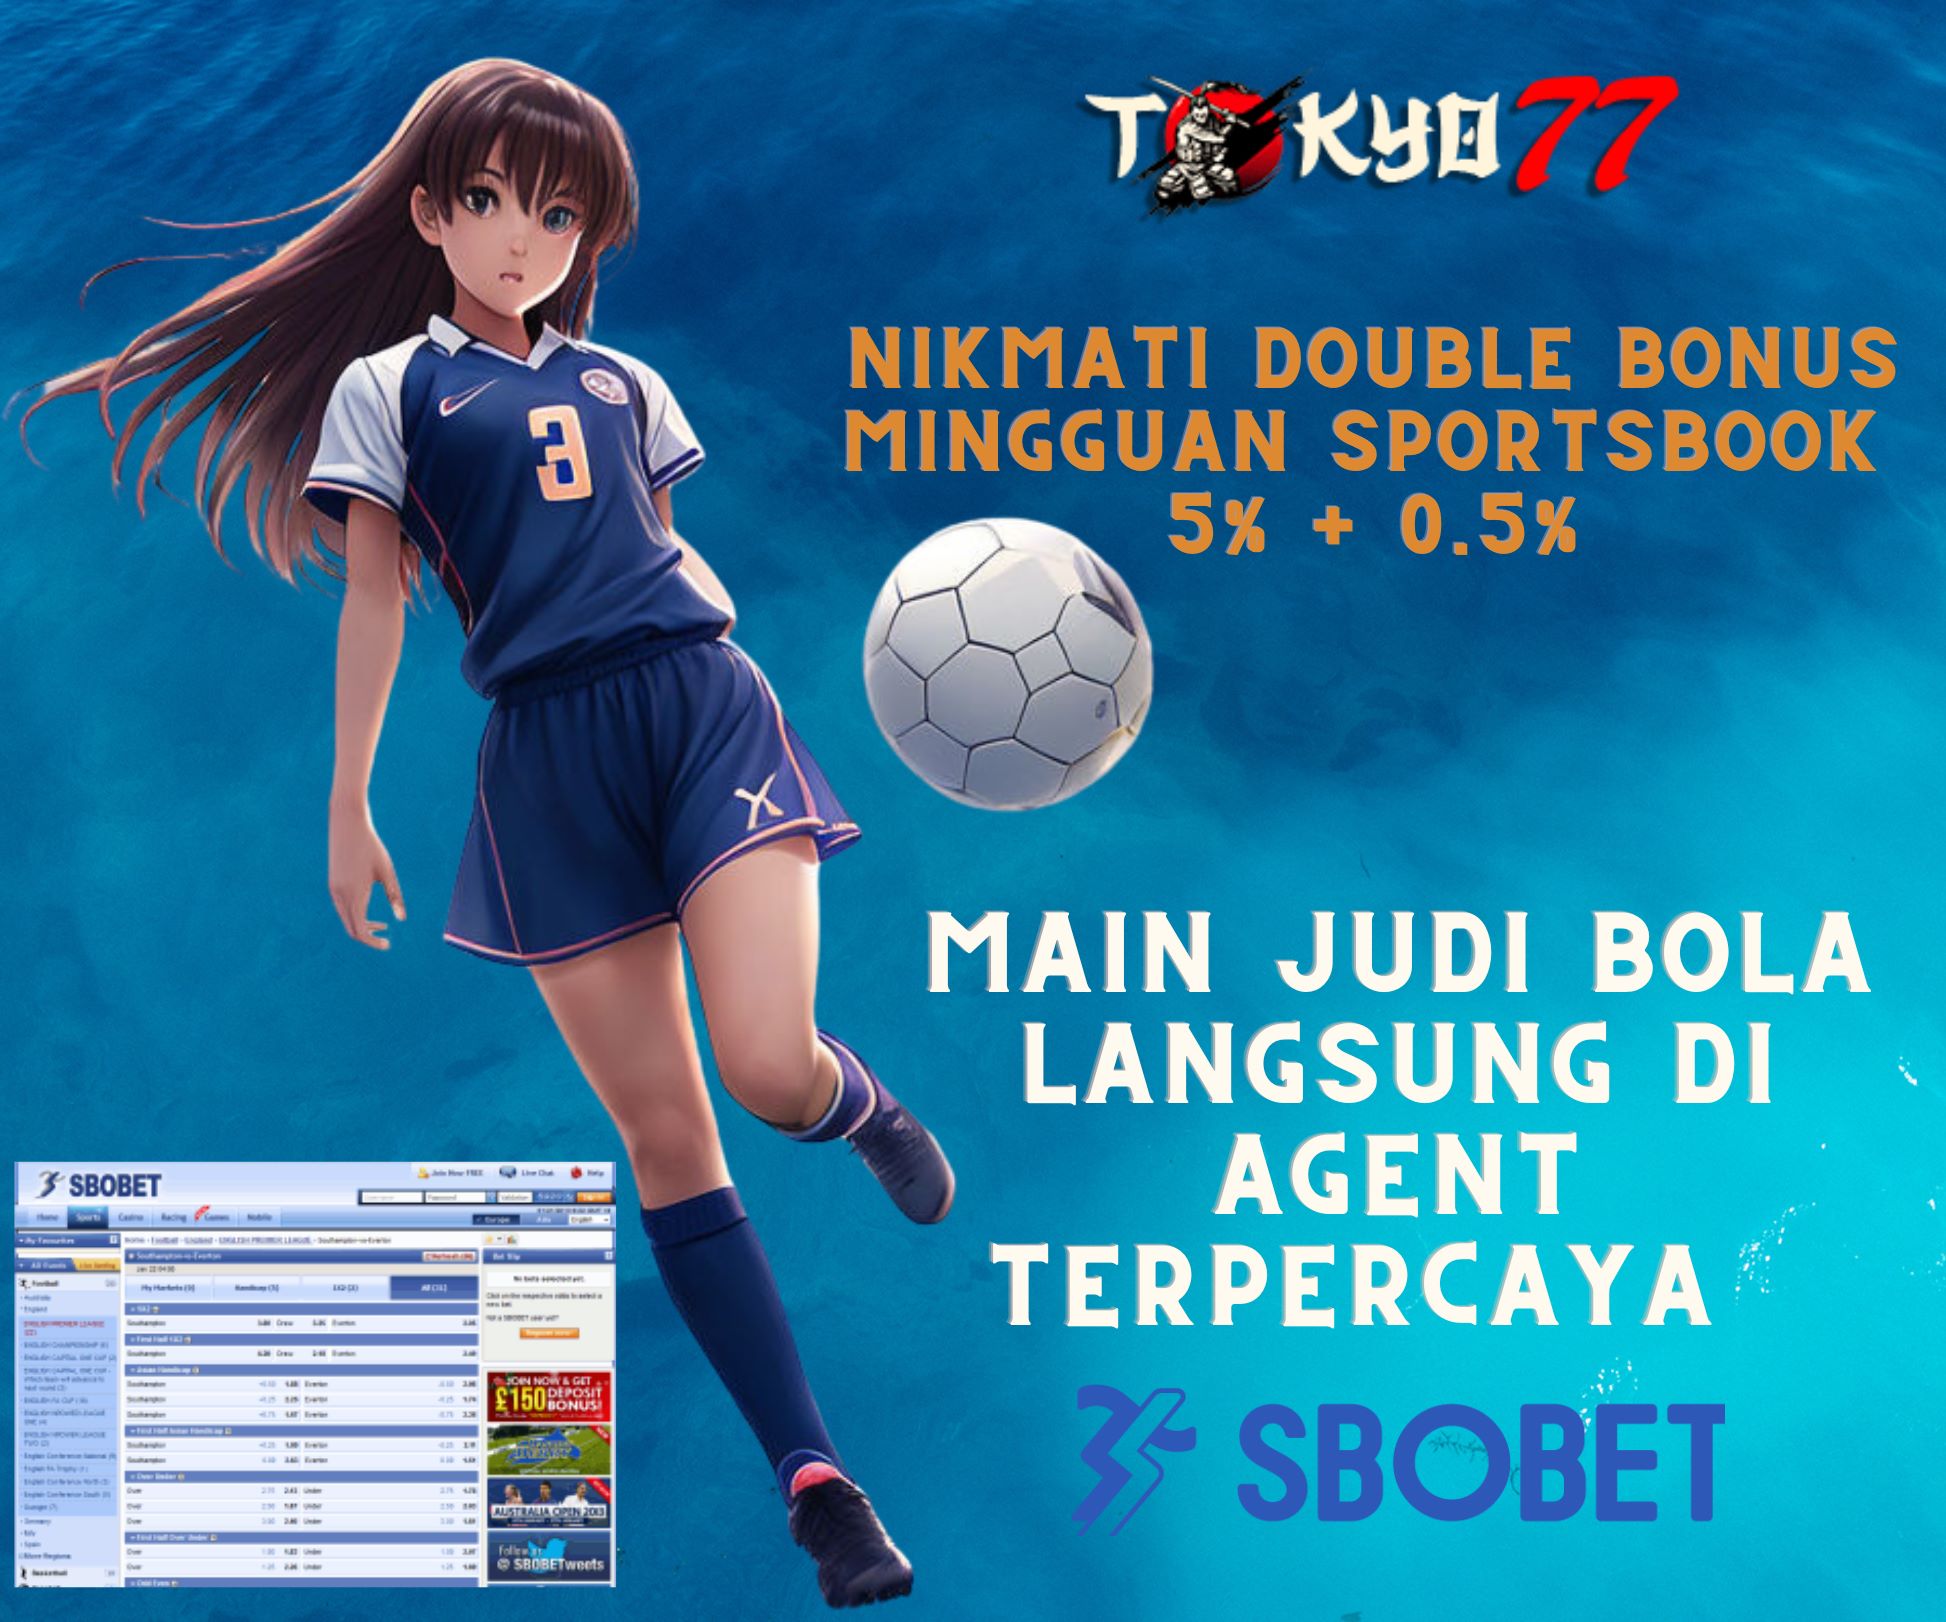 Reliable Techniques for Playing Football Betting on Sbobet